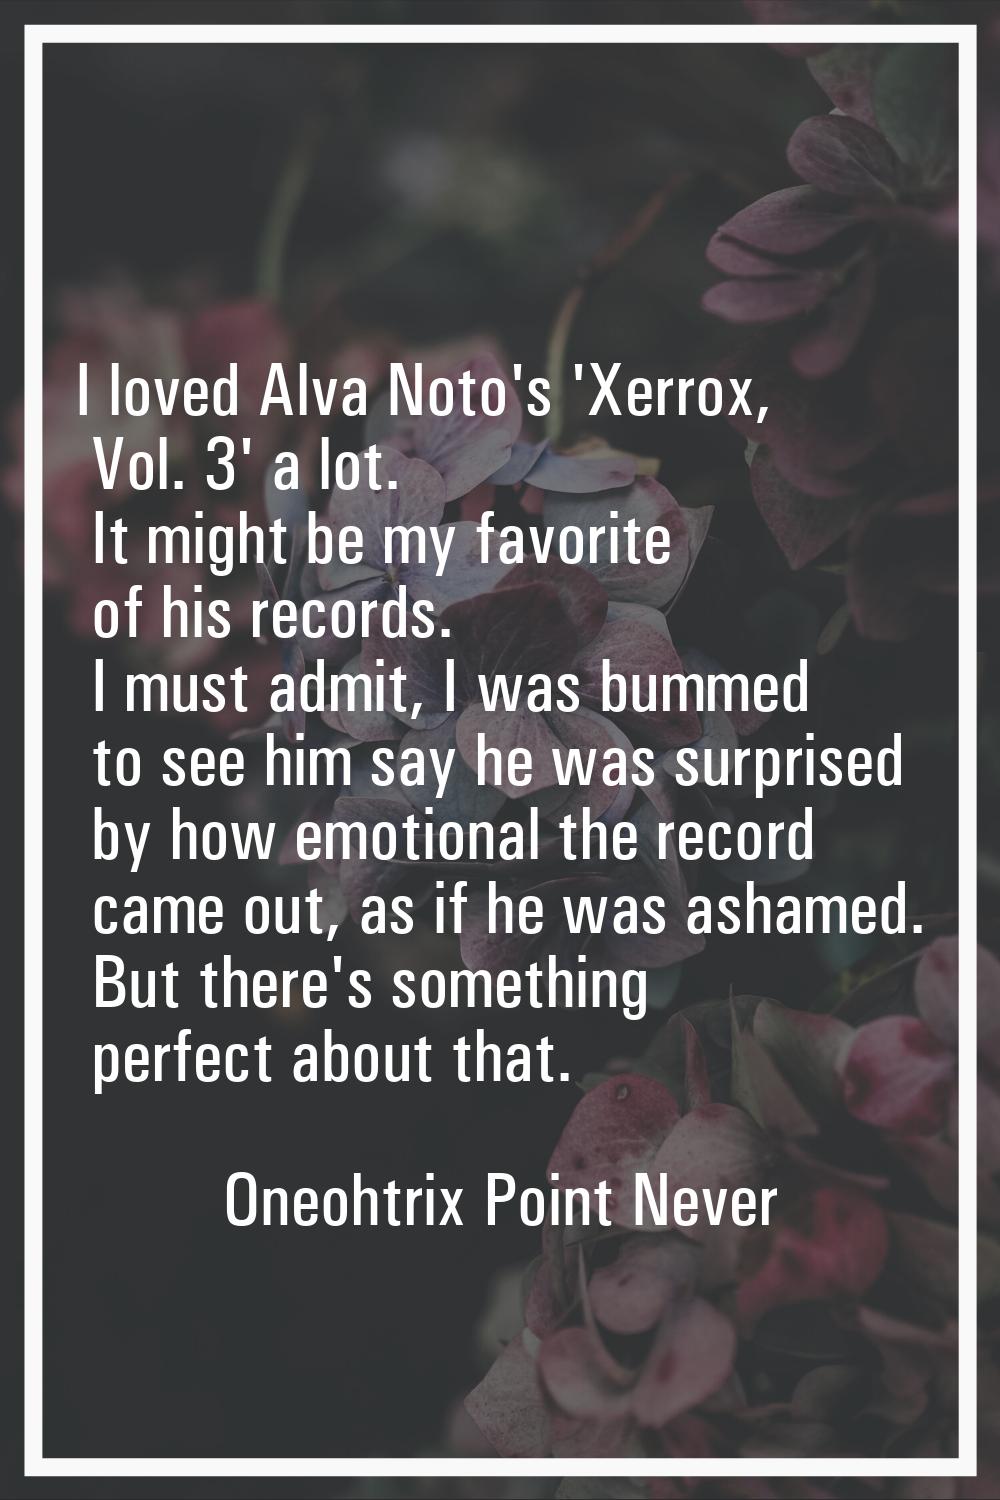 I loved Alva Noto's 'Xerrox, Vol. 3' a lot. It might be my favorite of his records. I must admit, I